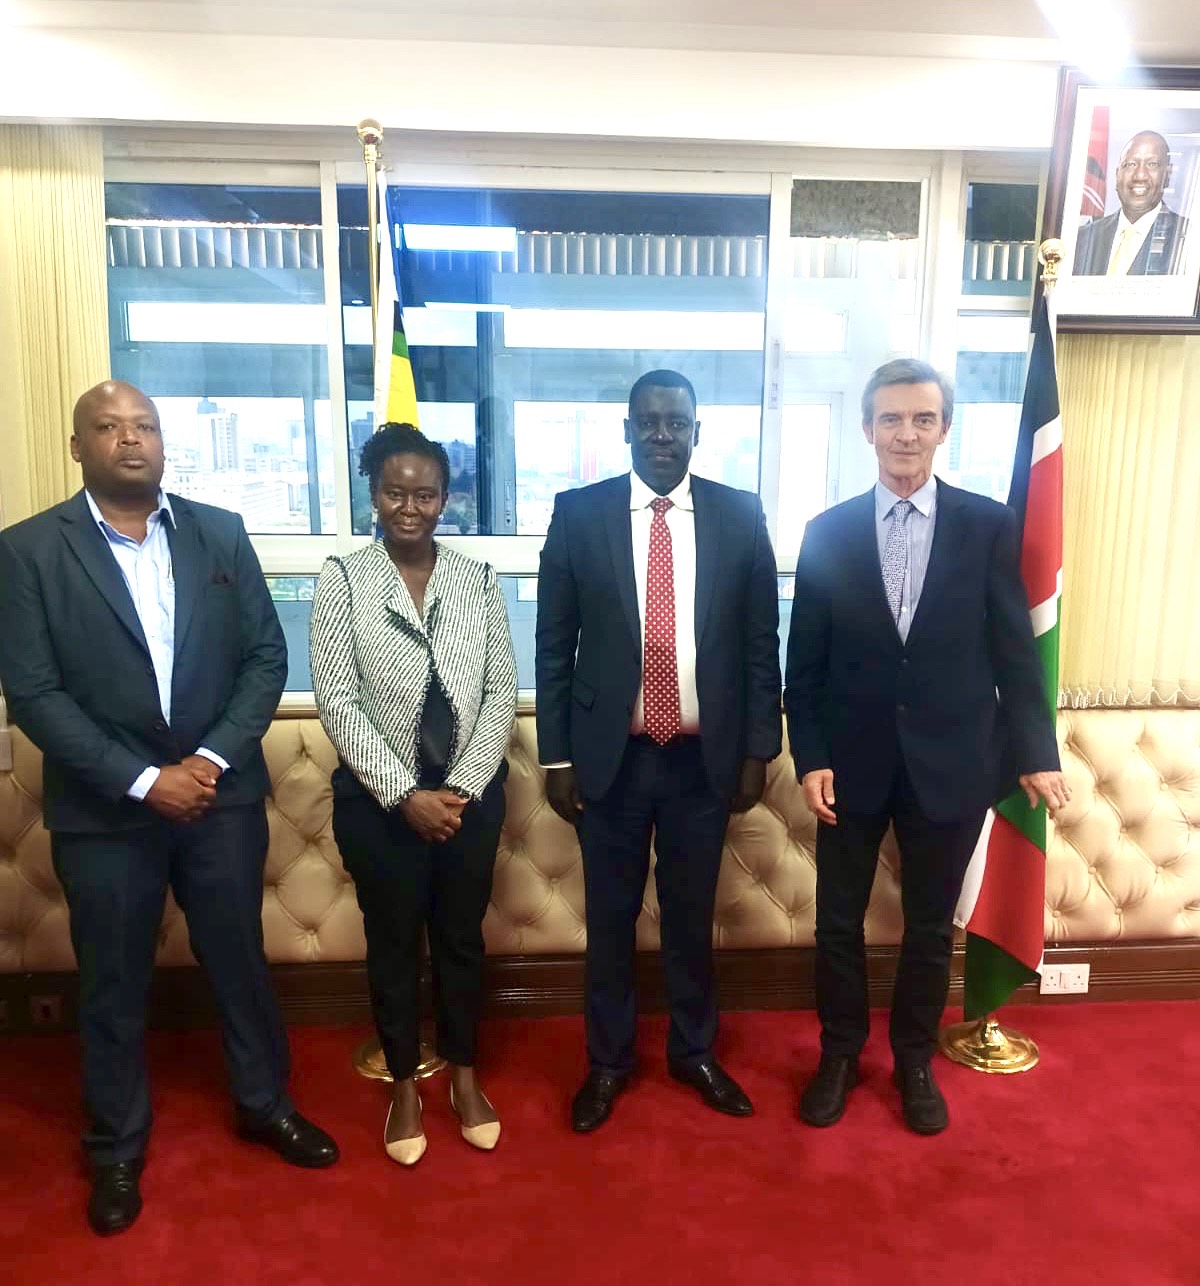 Kenyan Health Ministry And UNOPS Discuss Partnership For Infrastructure And Equipment Development